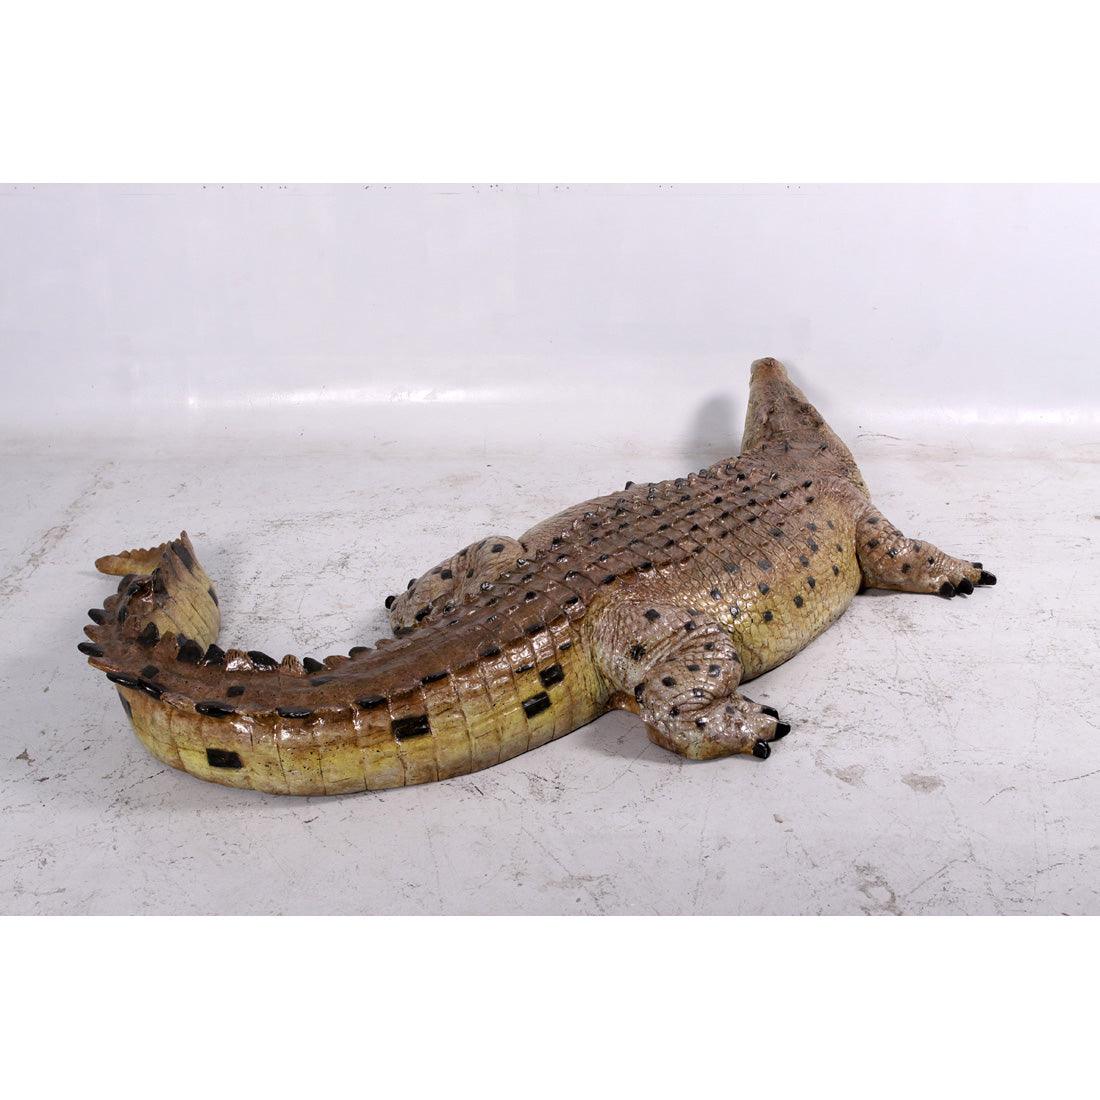 Crocodile Mouth Closed Life Size Statue - LM Treasures Prop Rentals 